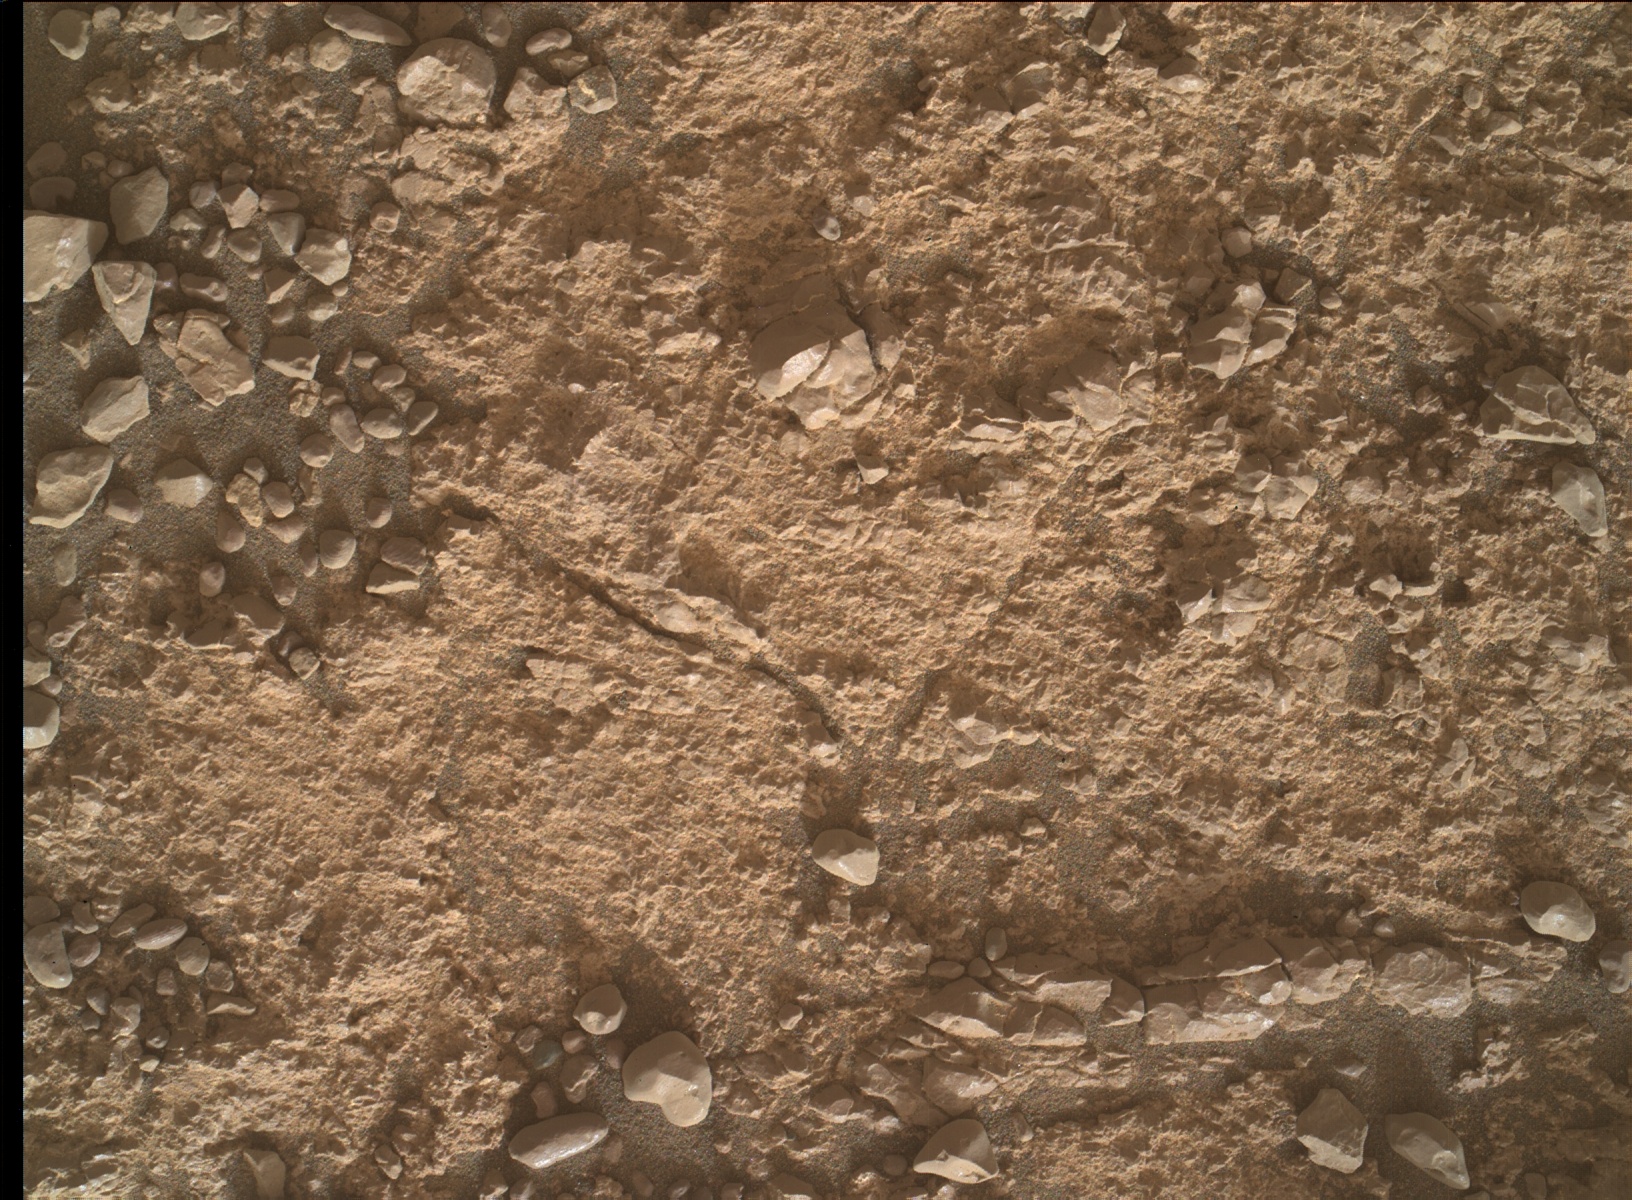 Nasa's Mars rover Curiosity acquired this image using its Mars Hand Lens Imager (MAHLI) on Sol 2258